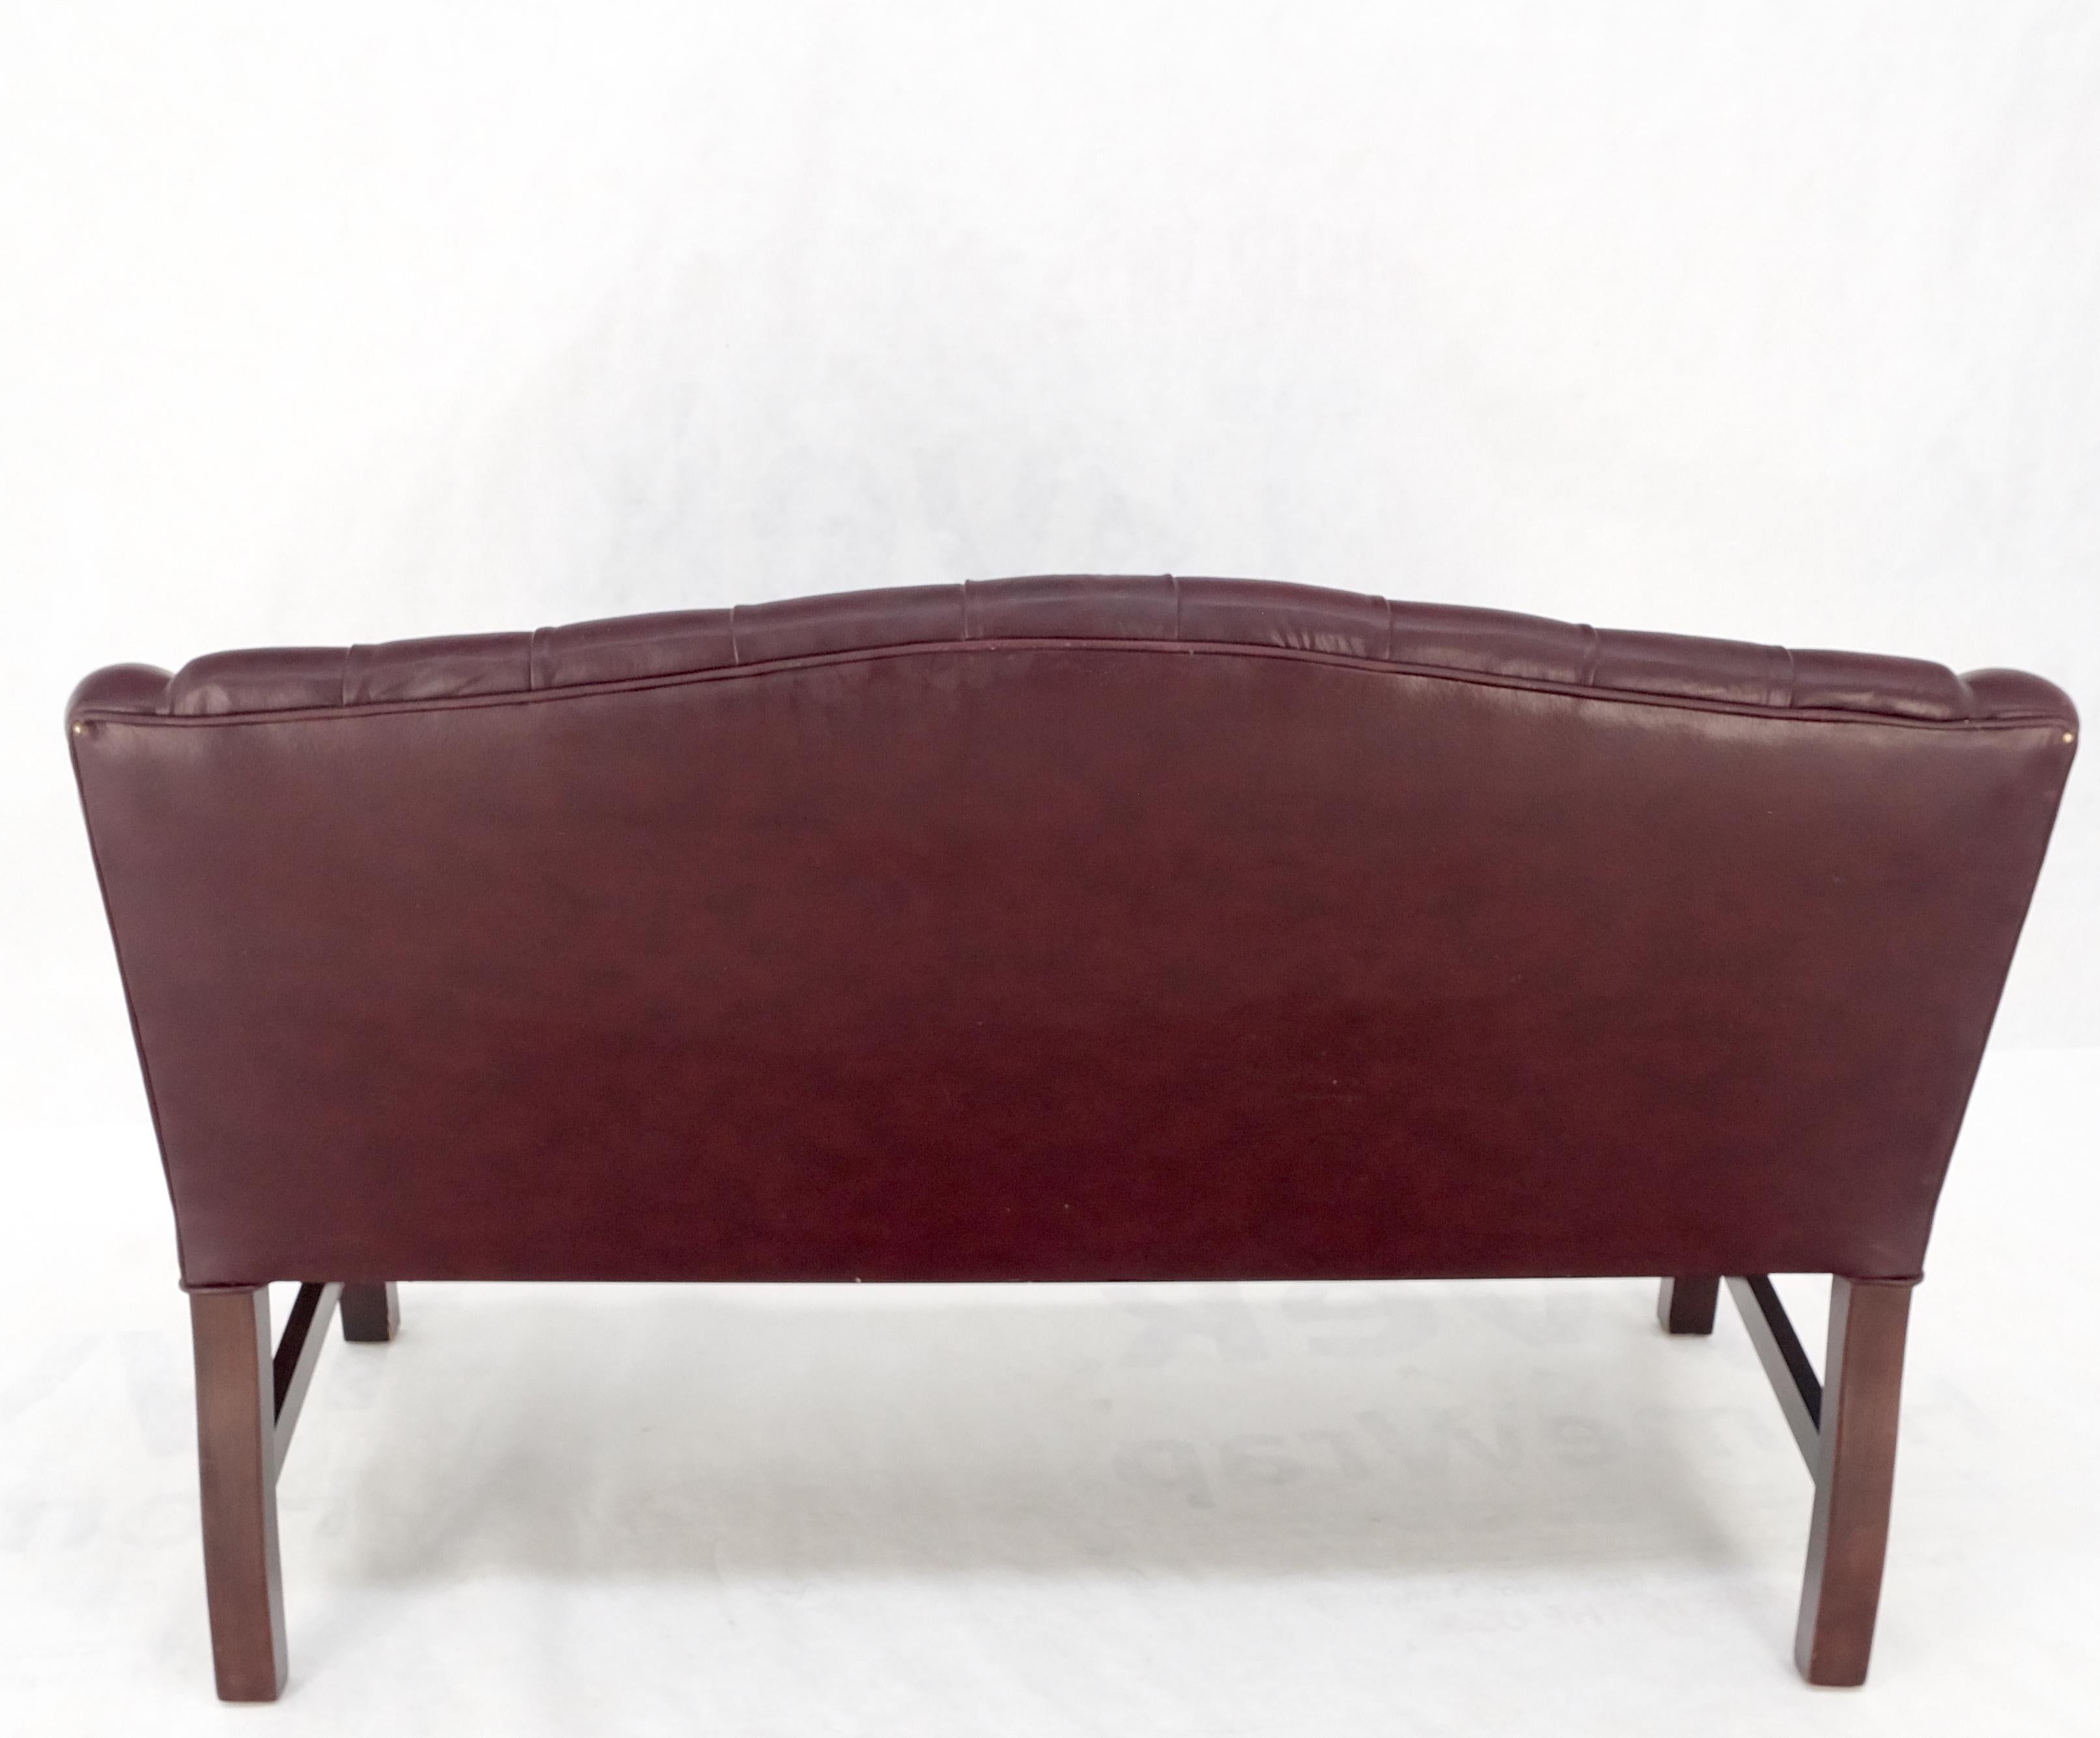 Tufted Burgundy Leather Federal Style Settee Love Seat Couch Sofa MINT! For Sale 9